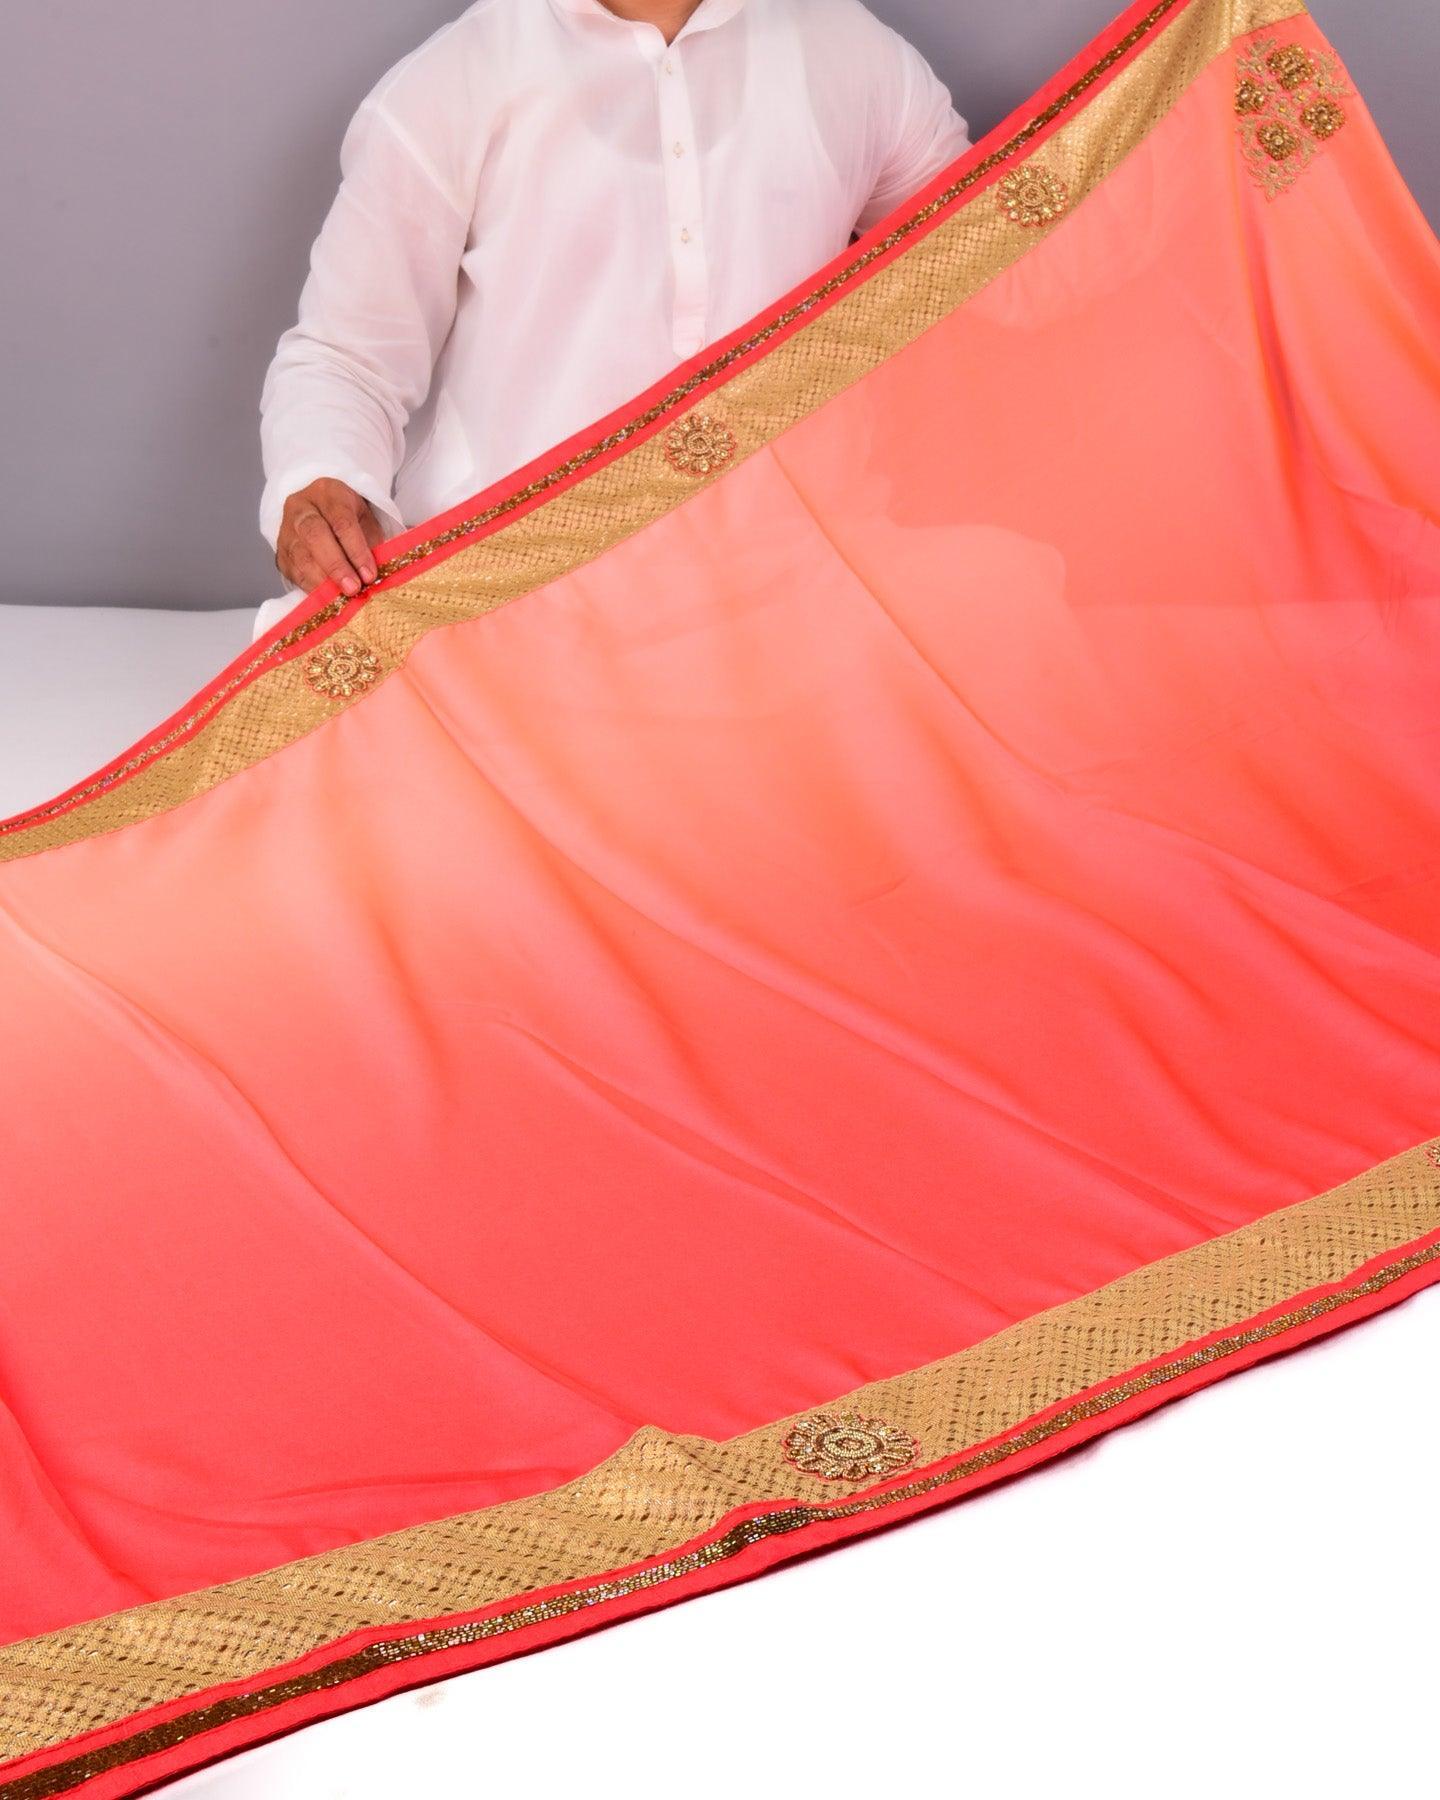 Peach Georgette Embroidered Saree - By HolyWeaves, Benares